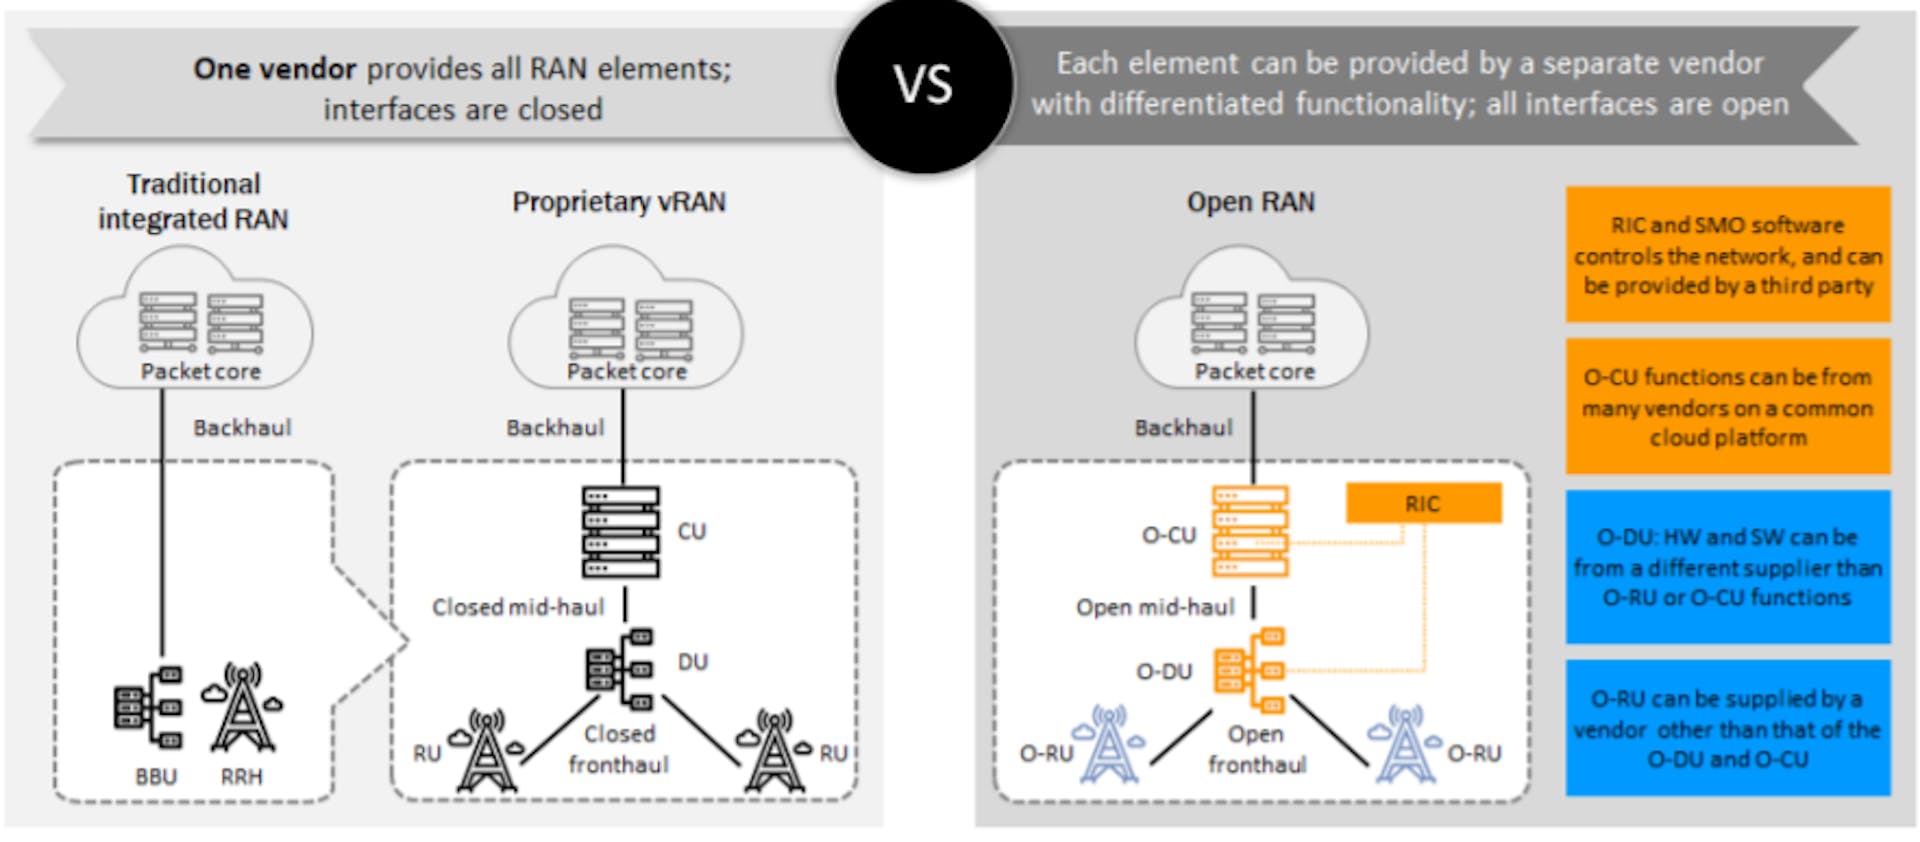 Figure 4. Disaggregation and open interfaces in Open RAN vs Traditional RAN. Source: Building an open Ran ECOSYSTEM FOR EUROPE